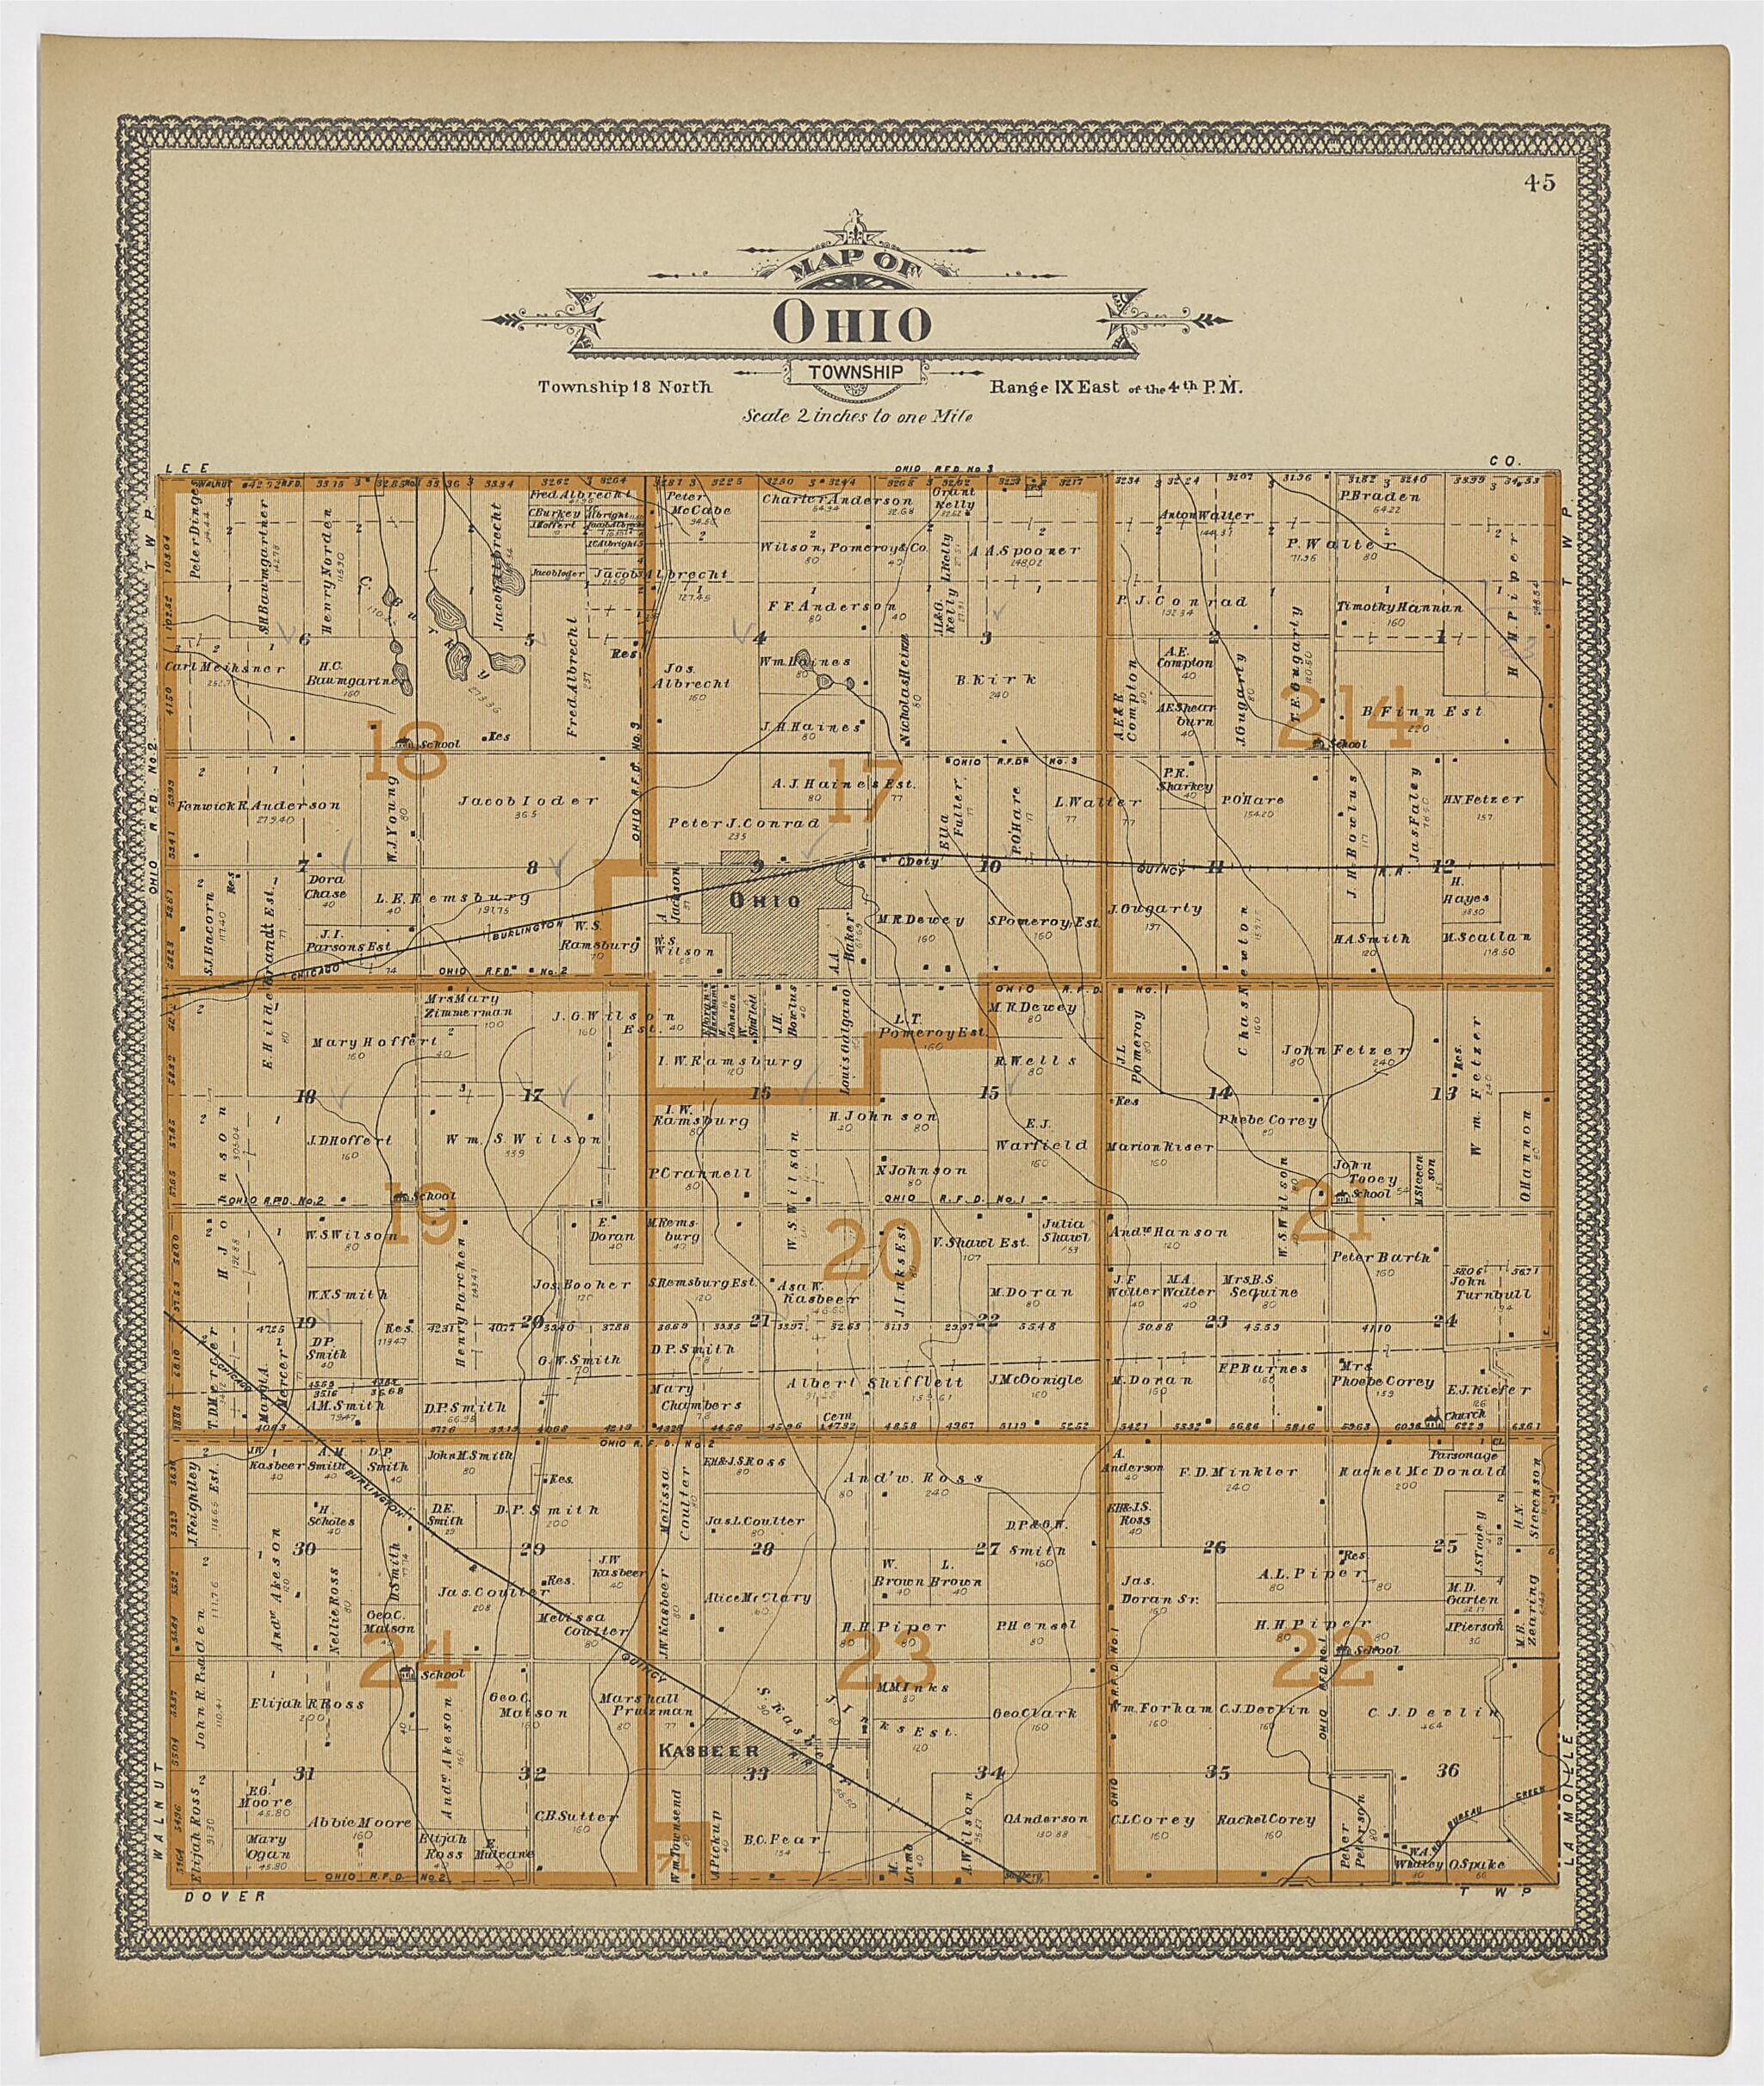 This old map of Image 26 of 20th Century Atlas of Bureau County, Illinois from Atlas of Bureau County, Illinois from 1905 was created by  Middle-West Publishing Co in 1905